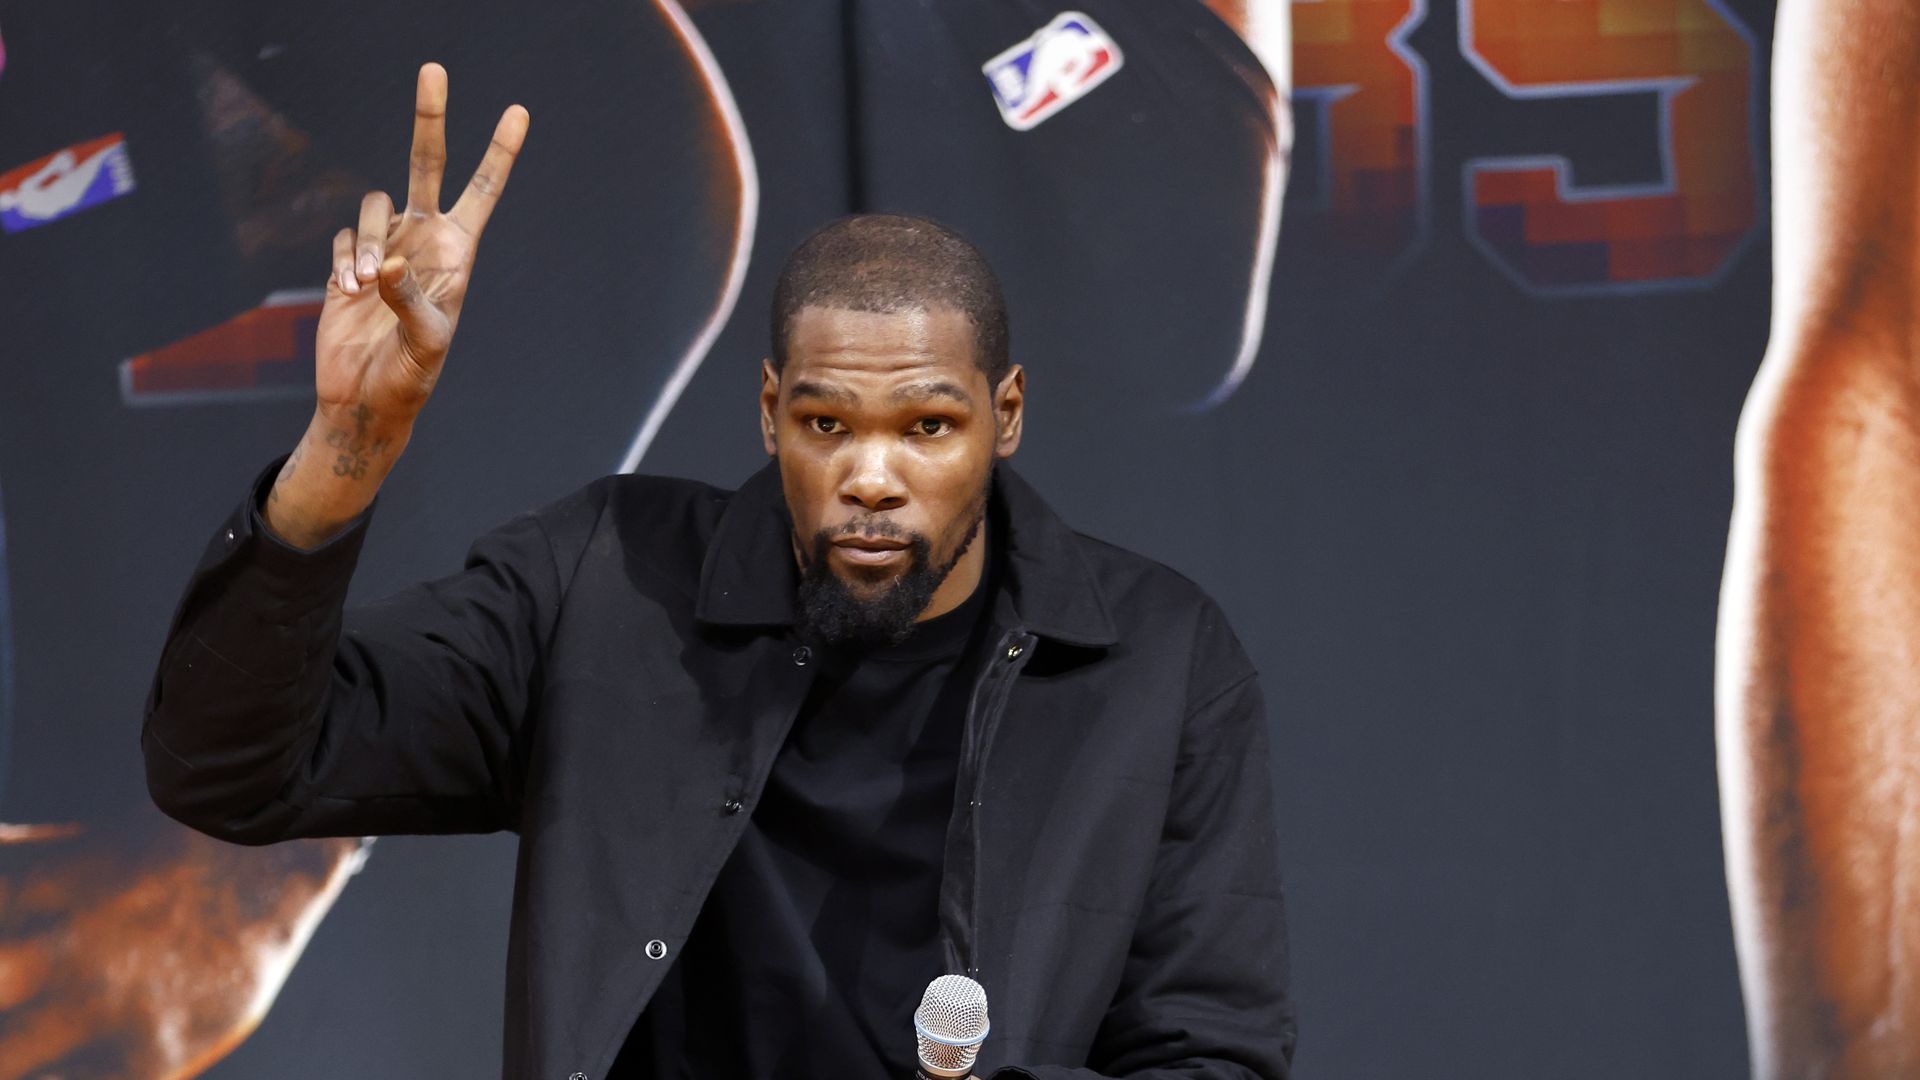 Phoenix Suns' Kevin Durant delays home debut after ankle sprain - Axios  Phoenix